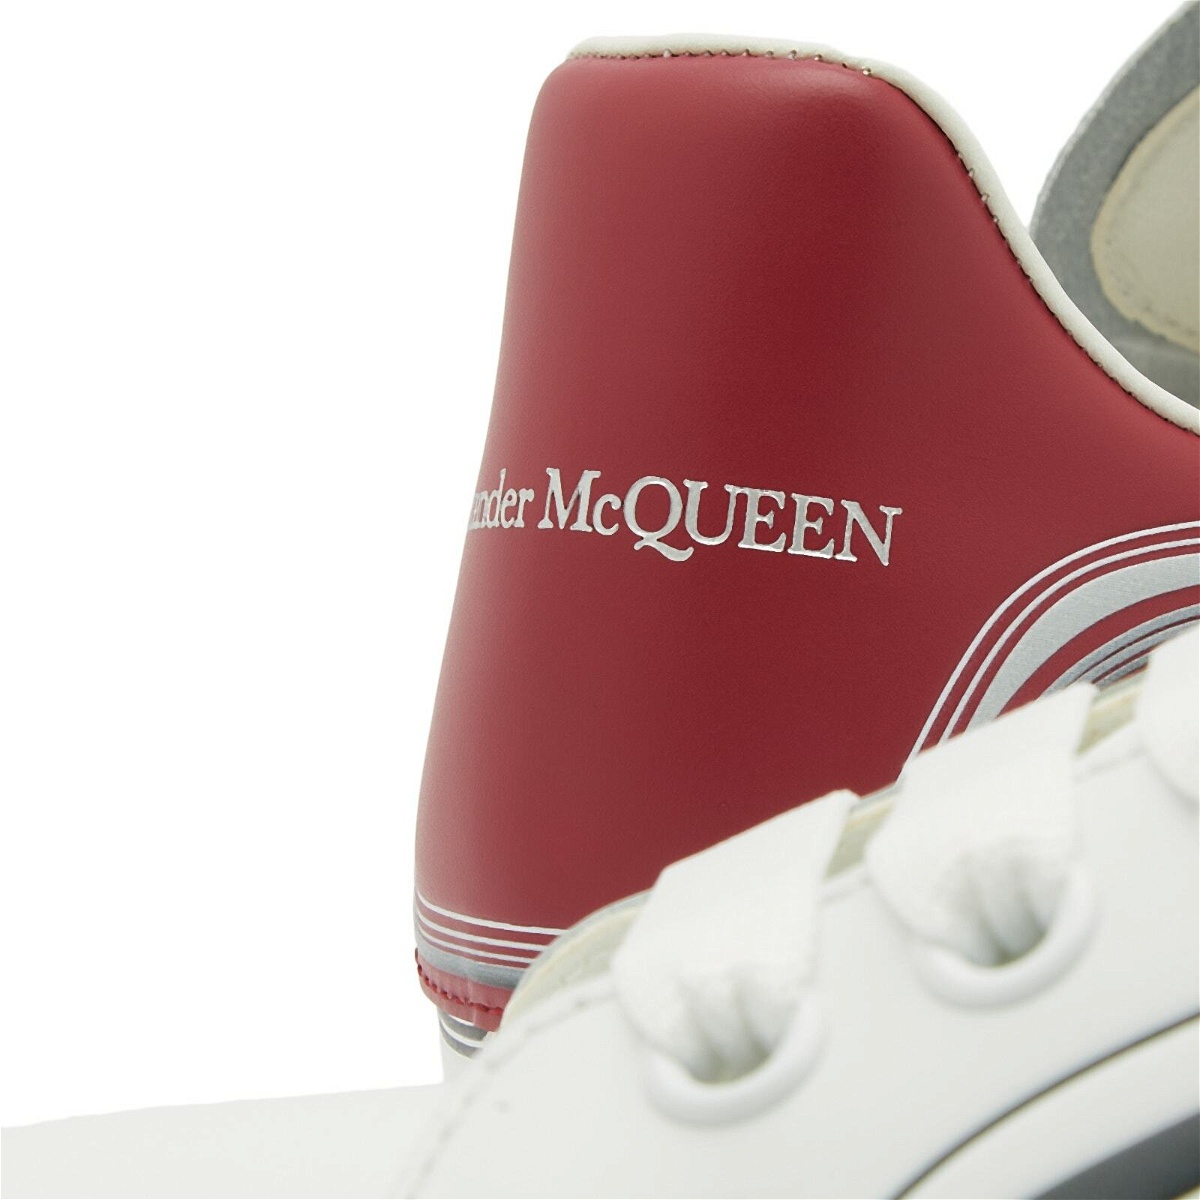 Shoes Sneakers By Alexander Mcqueen Size:9